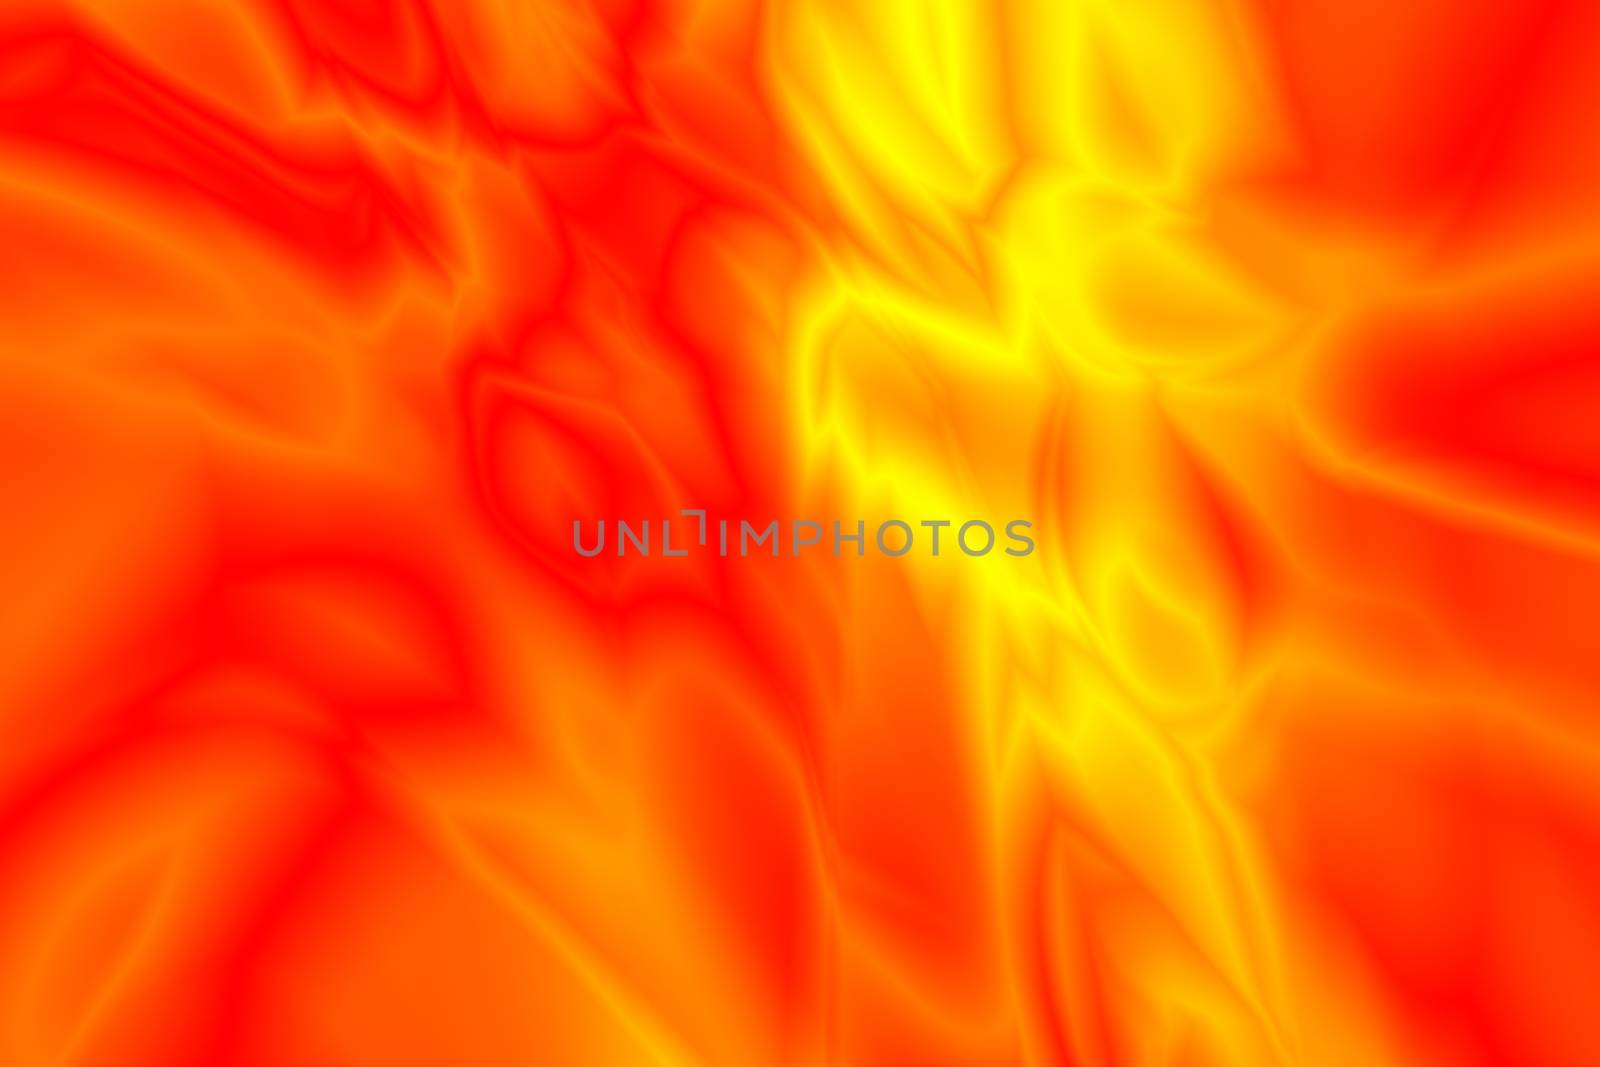 Bright orange patterned abstract background for design